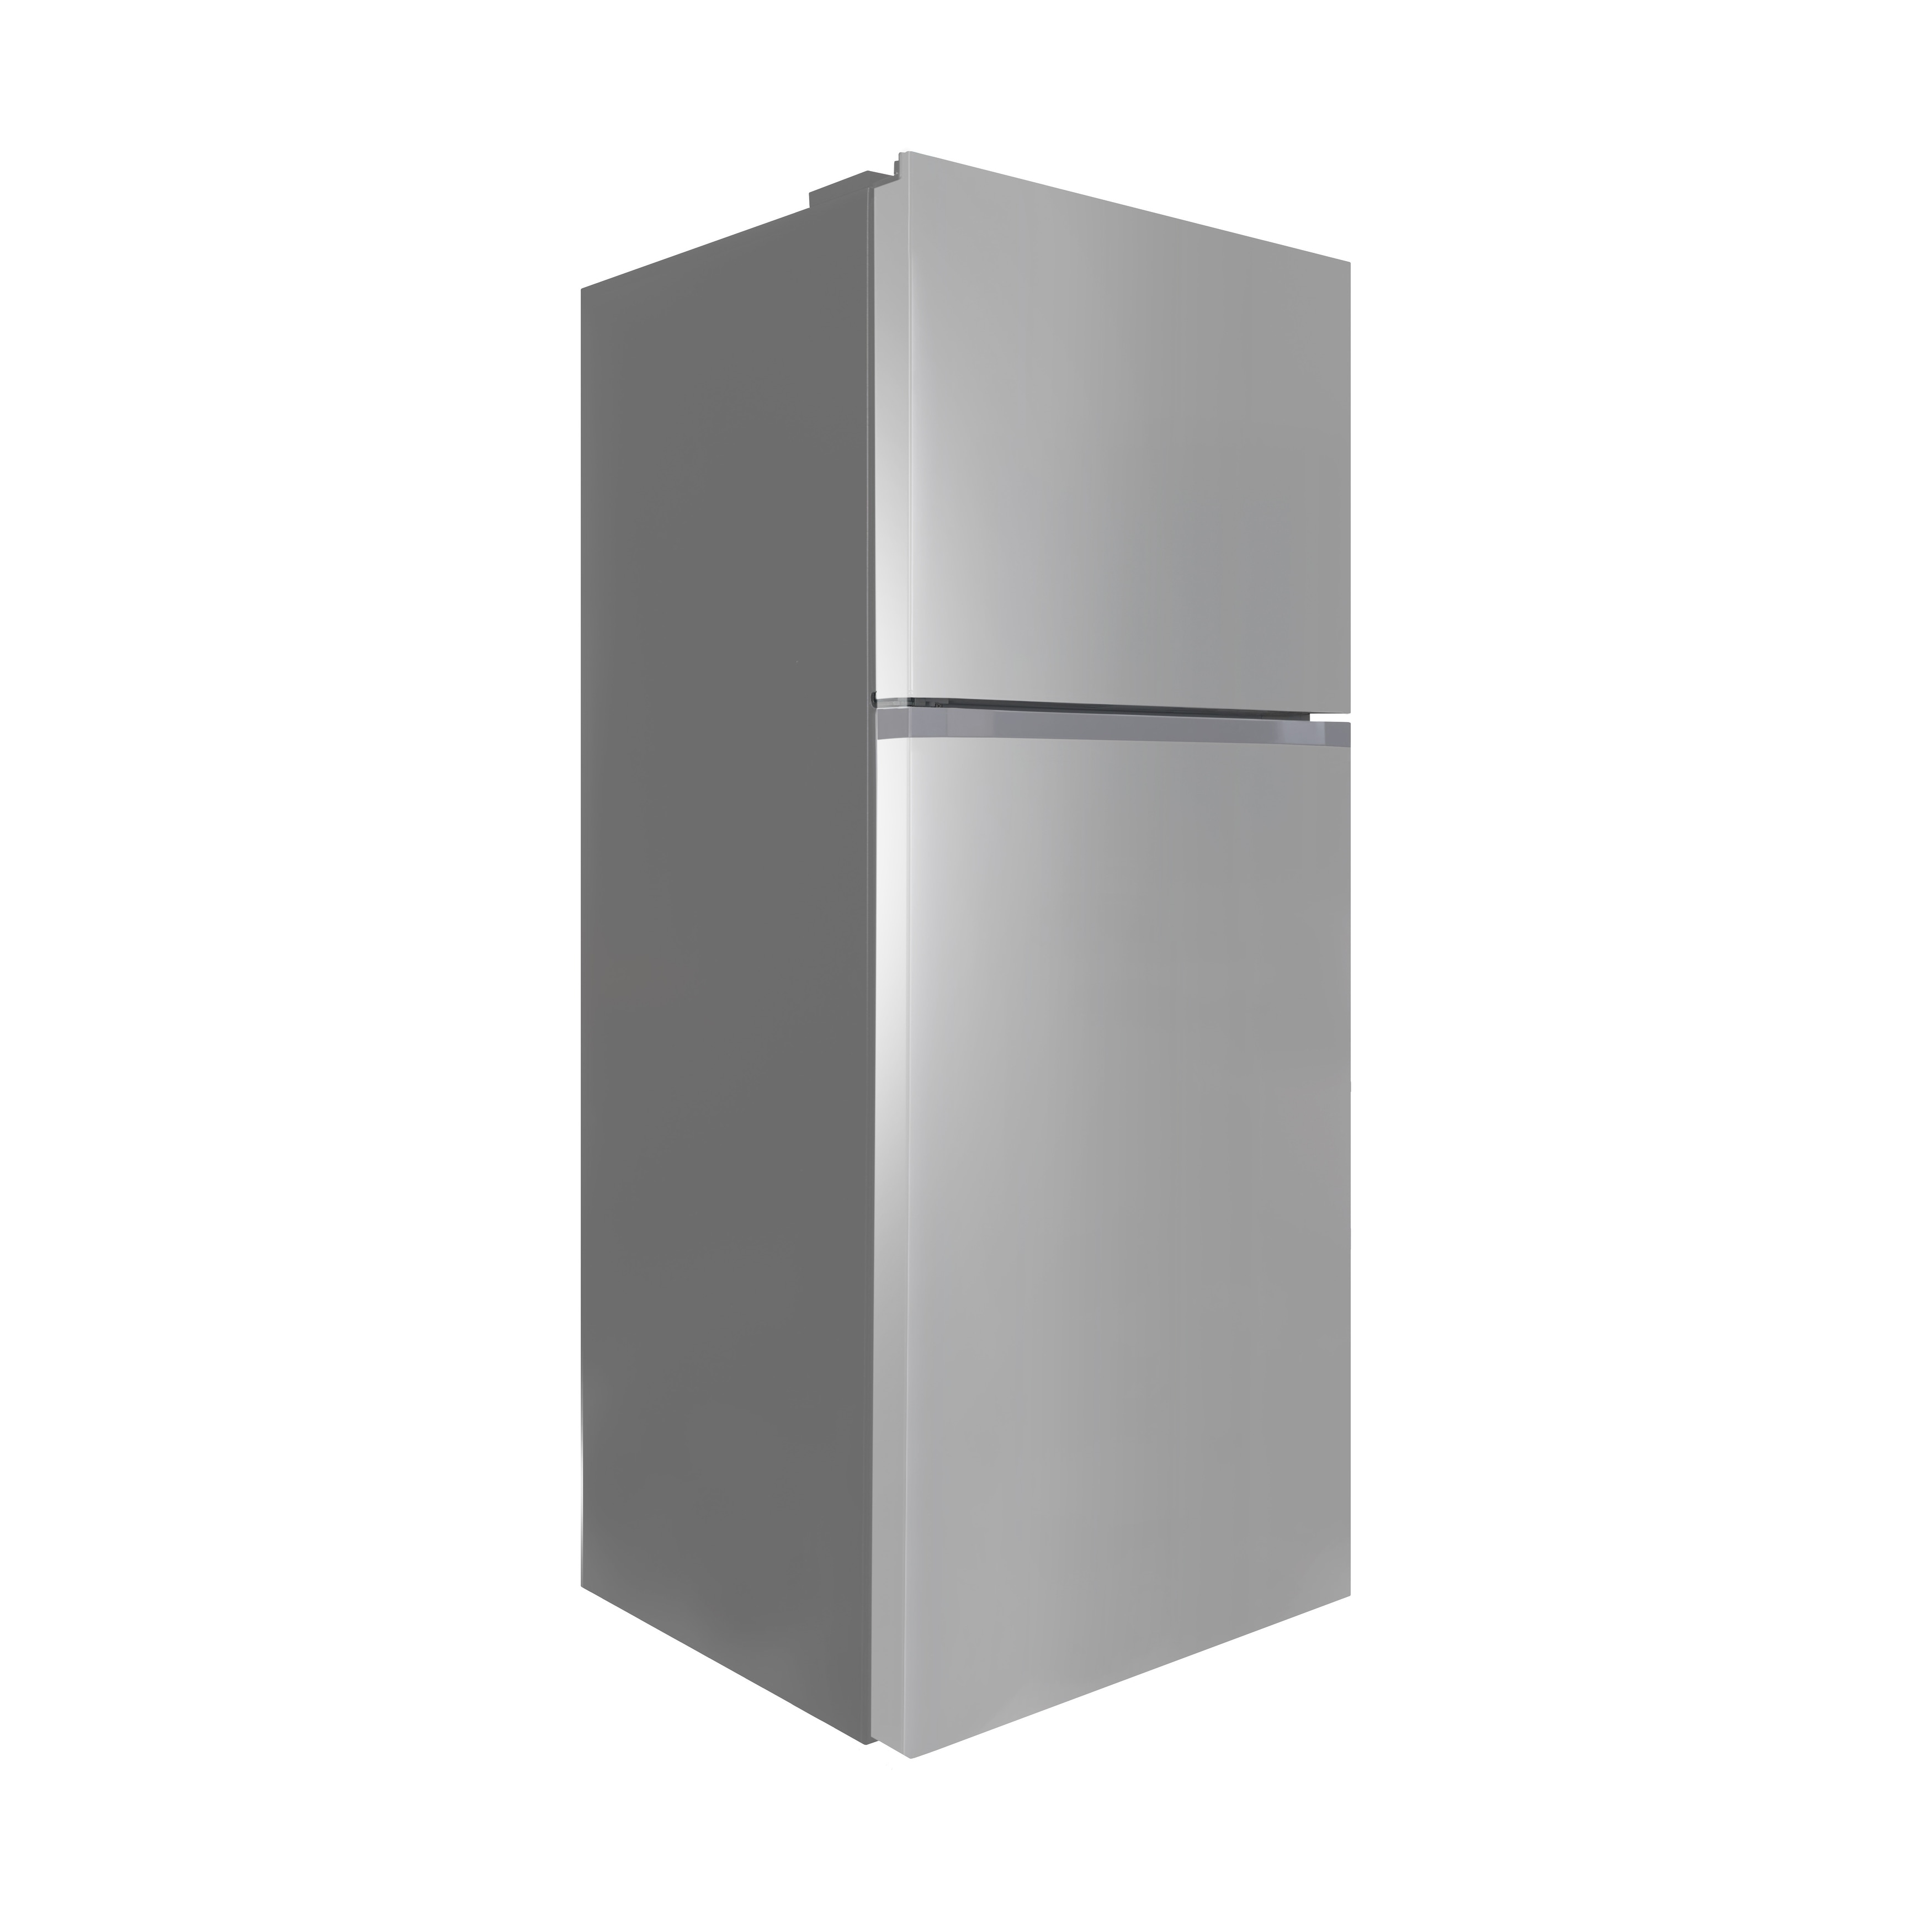 Forte 30 Inch Top Freezer Refrigerator with 18.16 cu. ft. Total Capacity